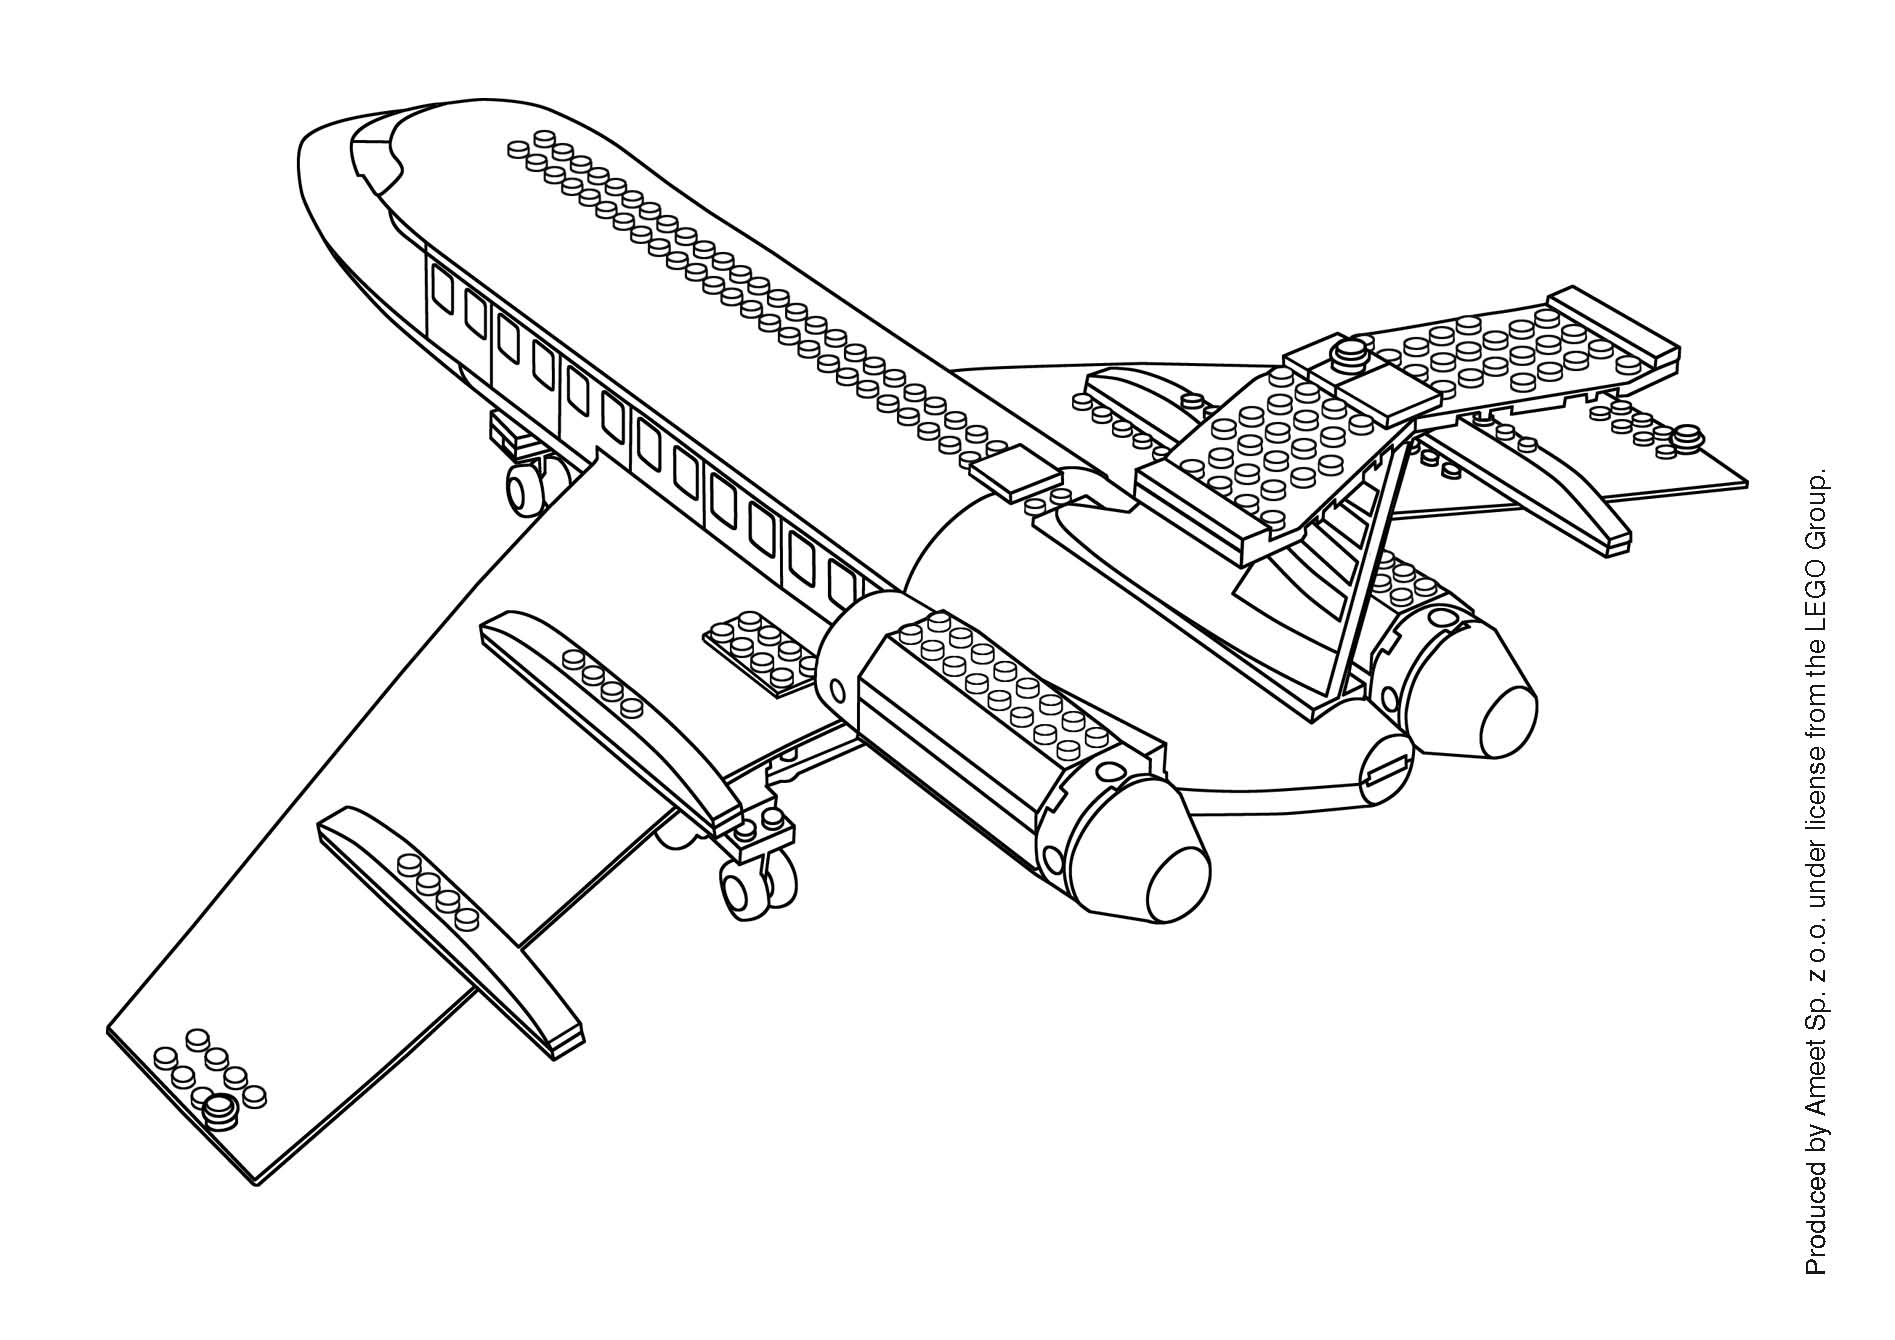 Lego Airplane Coloring Sheet / Lego Airplane Coloring Pages at